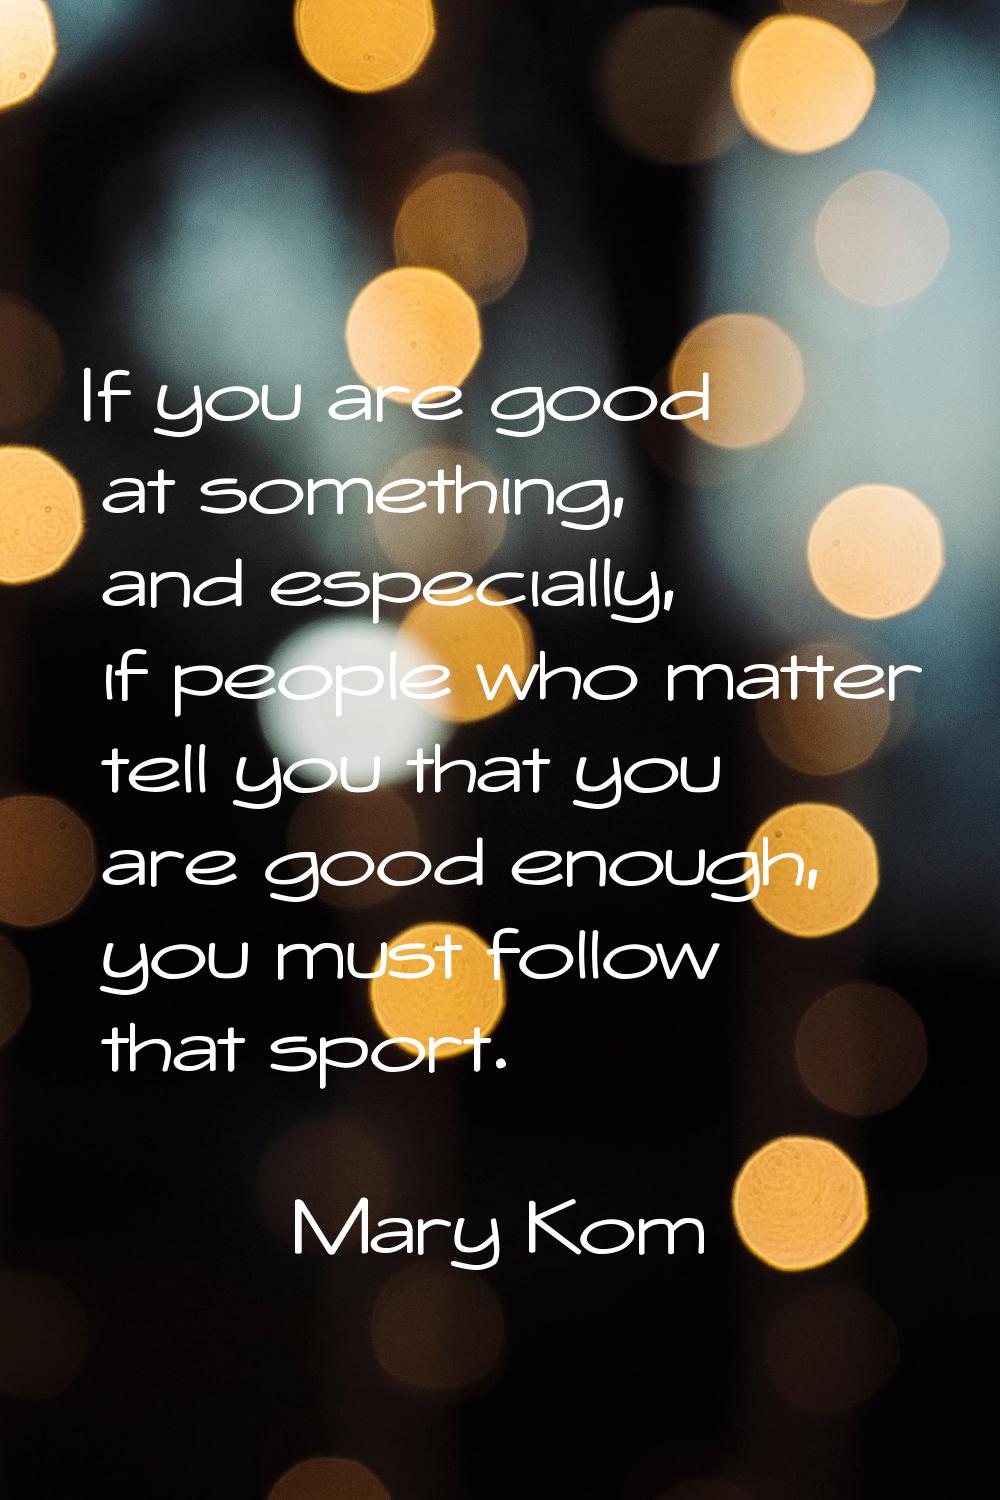 If you are good at something, and especially, if people who matter tell you that you are good enoug